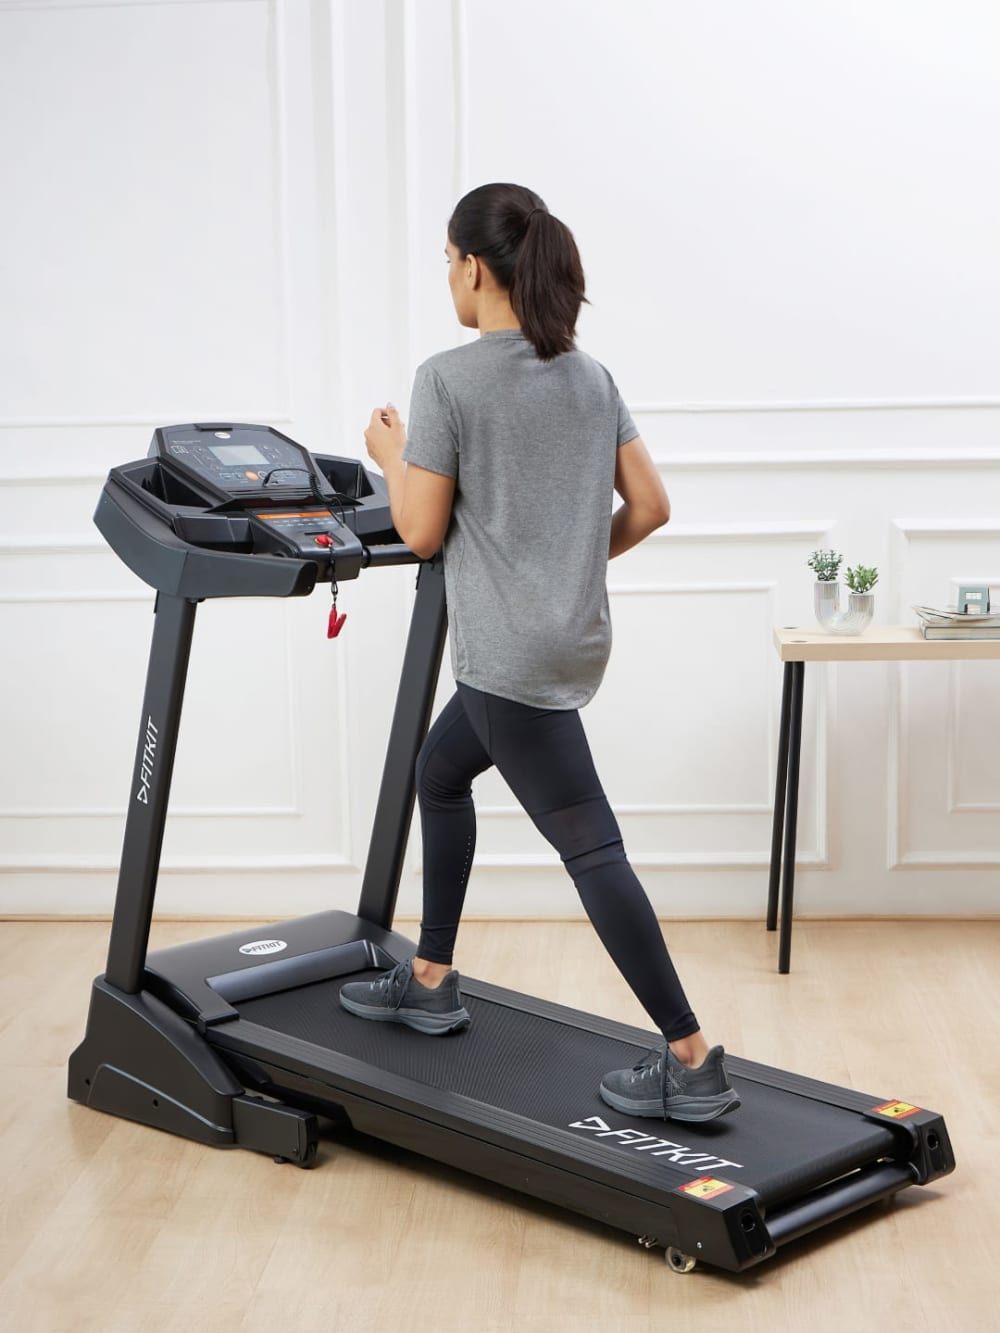 Buy HRX Hampson 3 HP Peak (Max Weight: 100 Kg) 3 Level Manual Incline  Treadmill for Home Gym Fitness with 1 Year Warranty Online at Low Prices in  India 